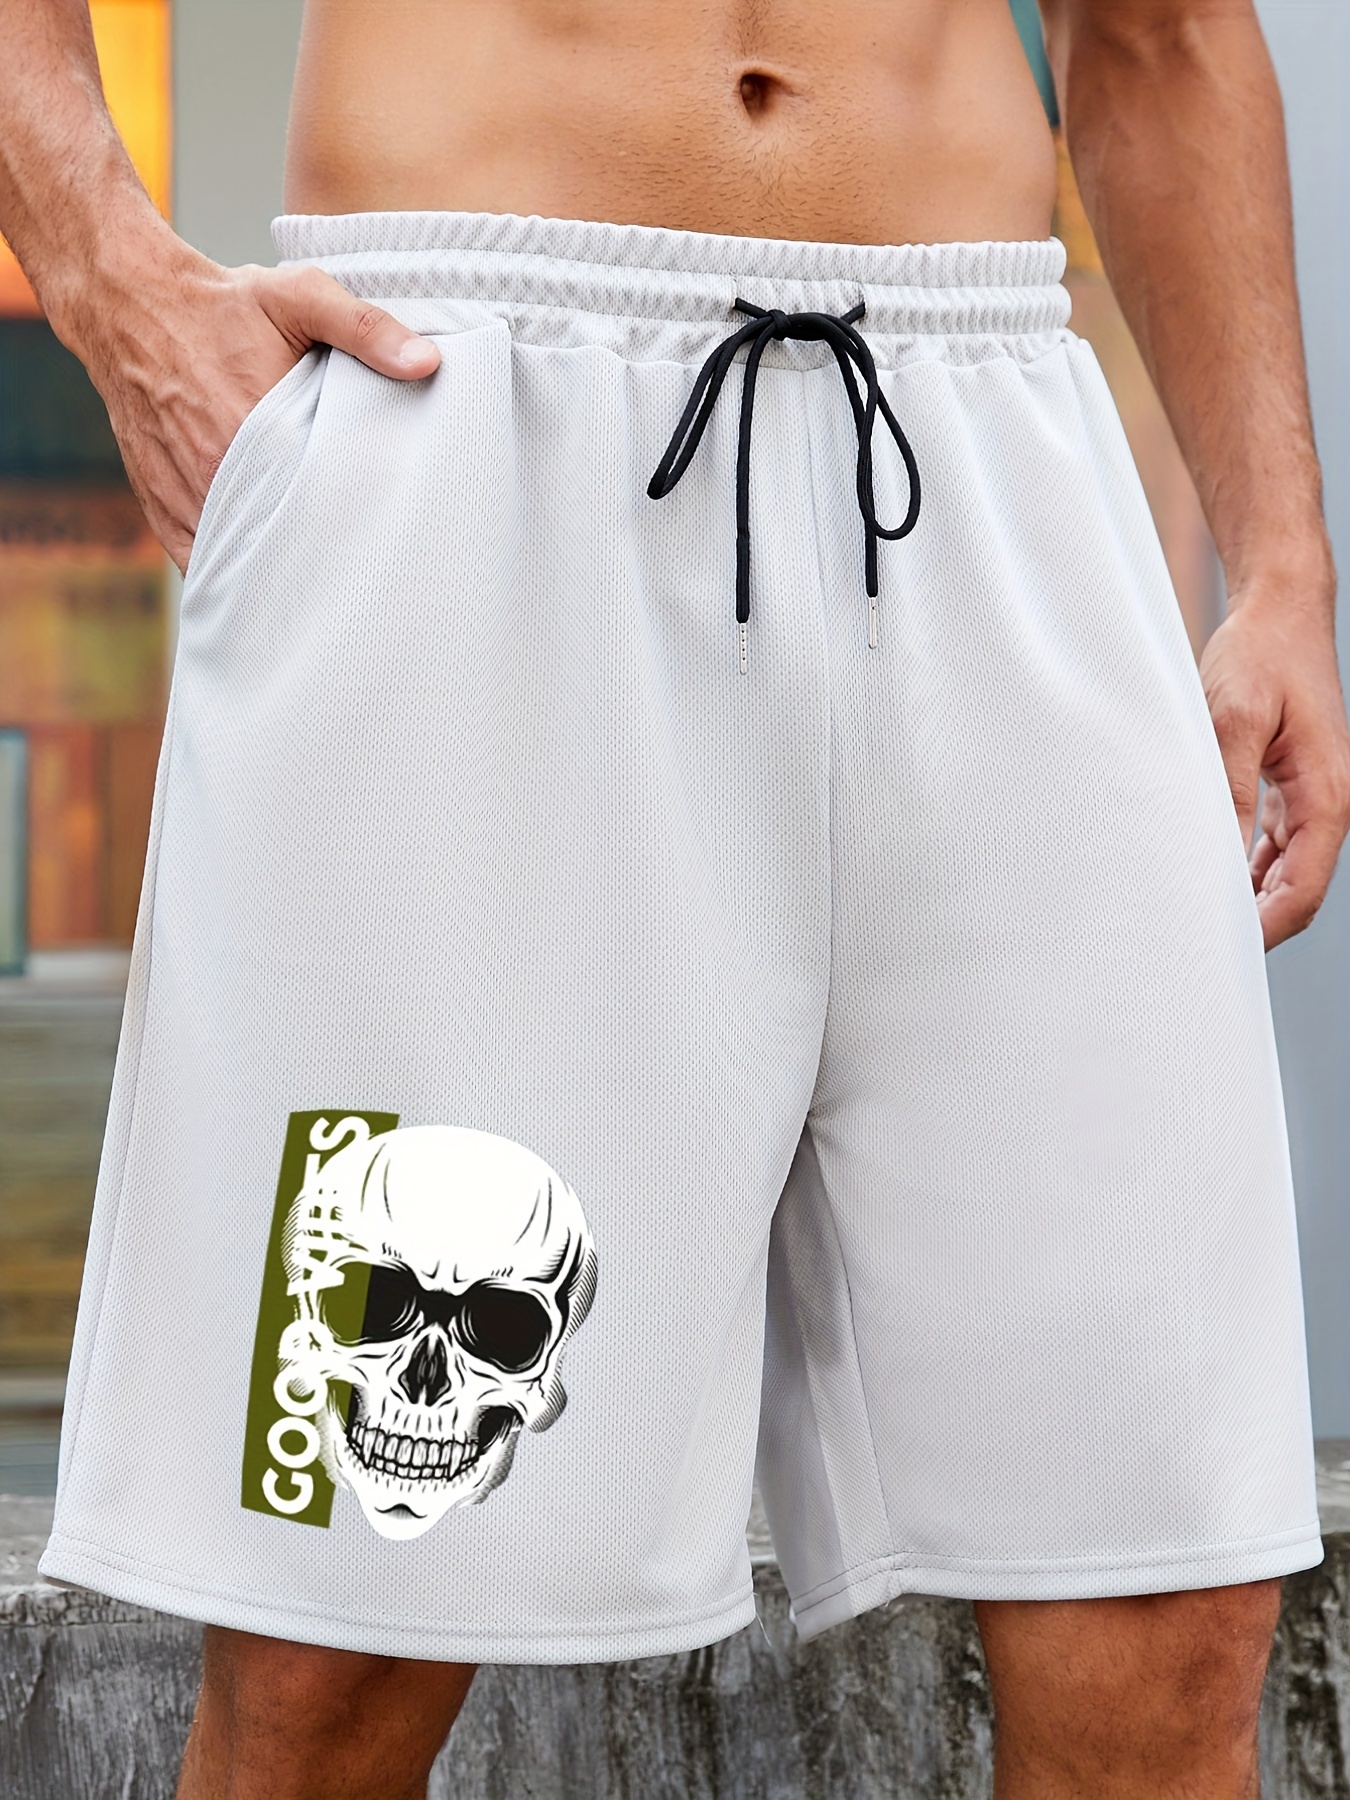 Relaxed Fit Mesh Shorts - White - Men